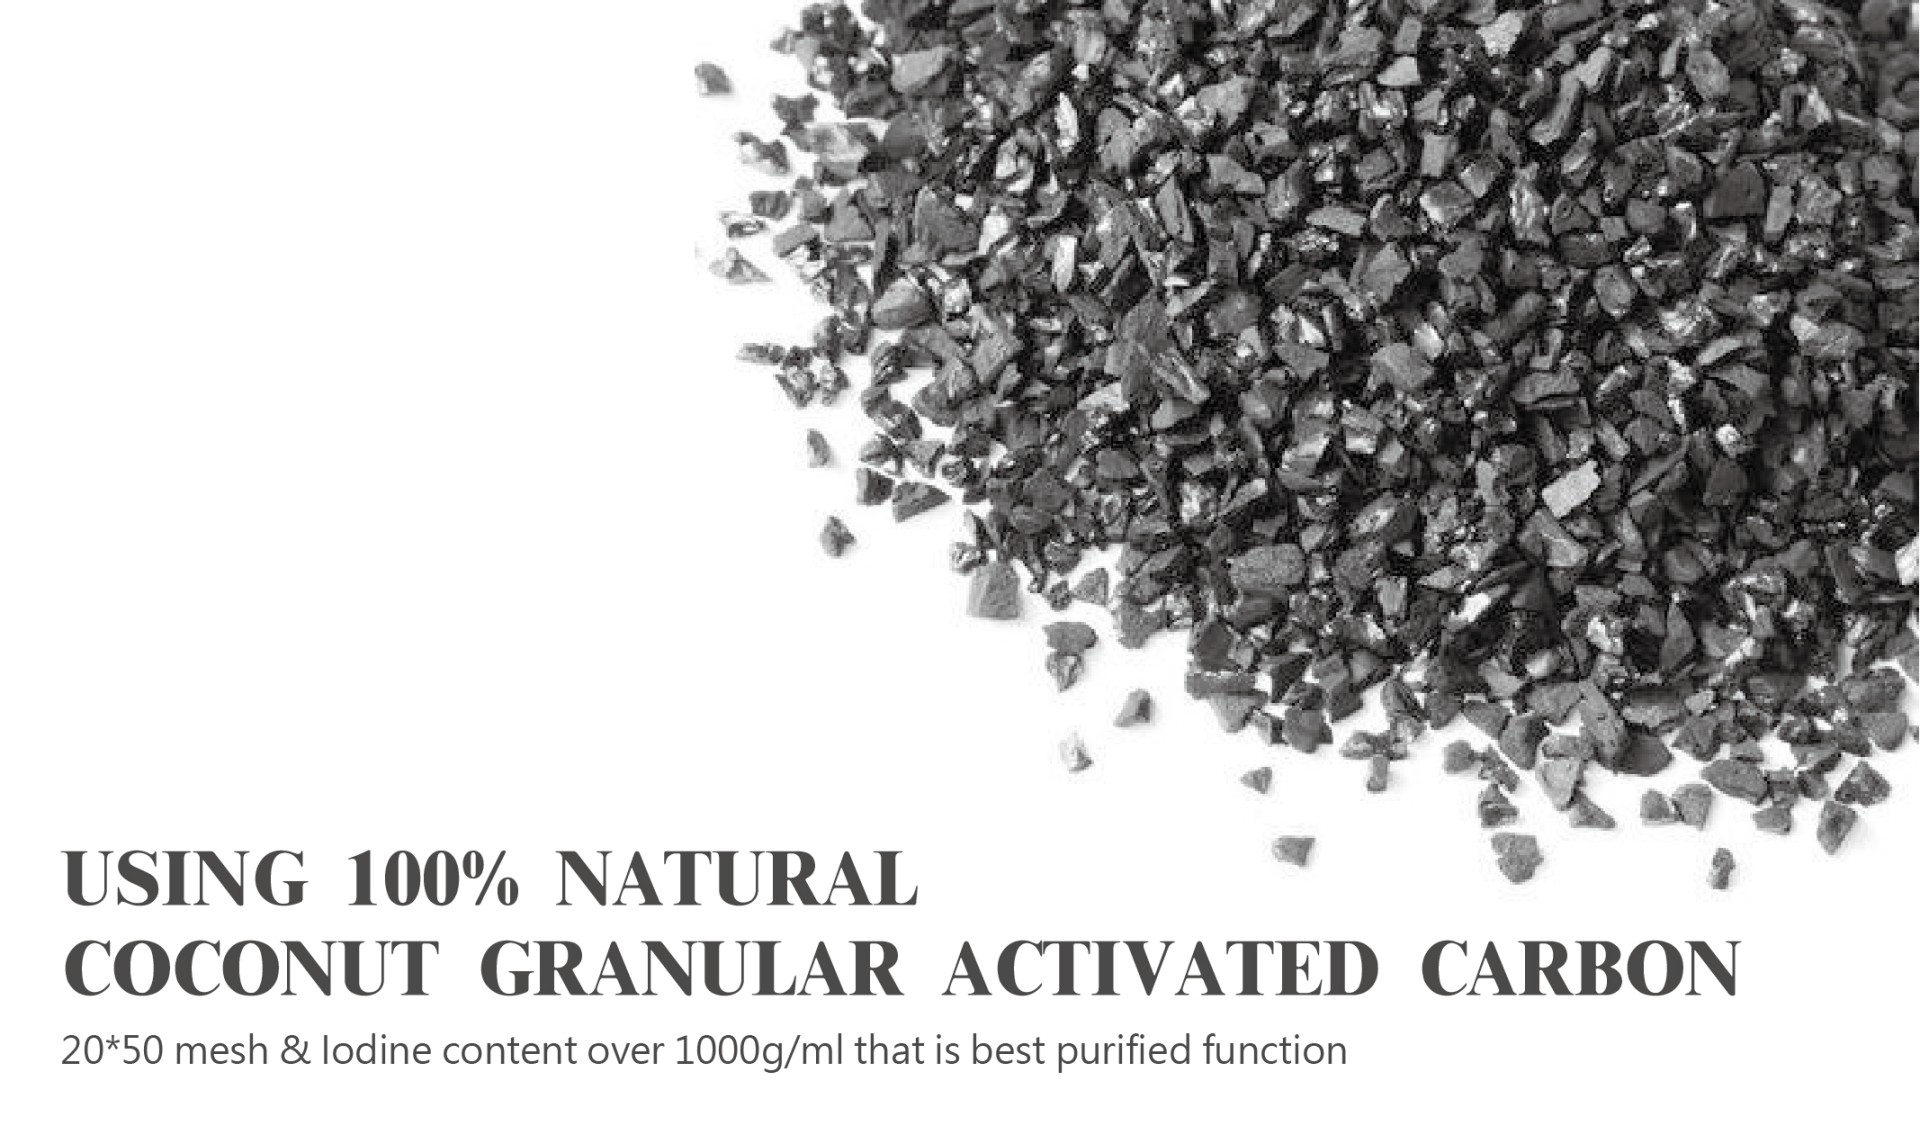 USING 100% NATURAL COCONUT GRANULAR ACTIVATED CARBON